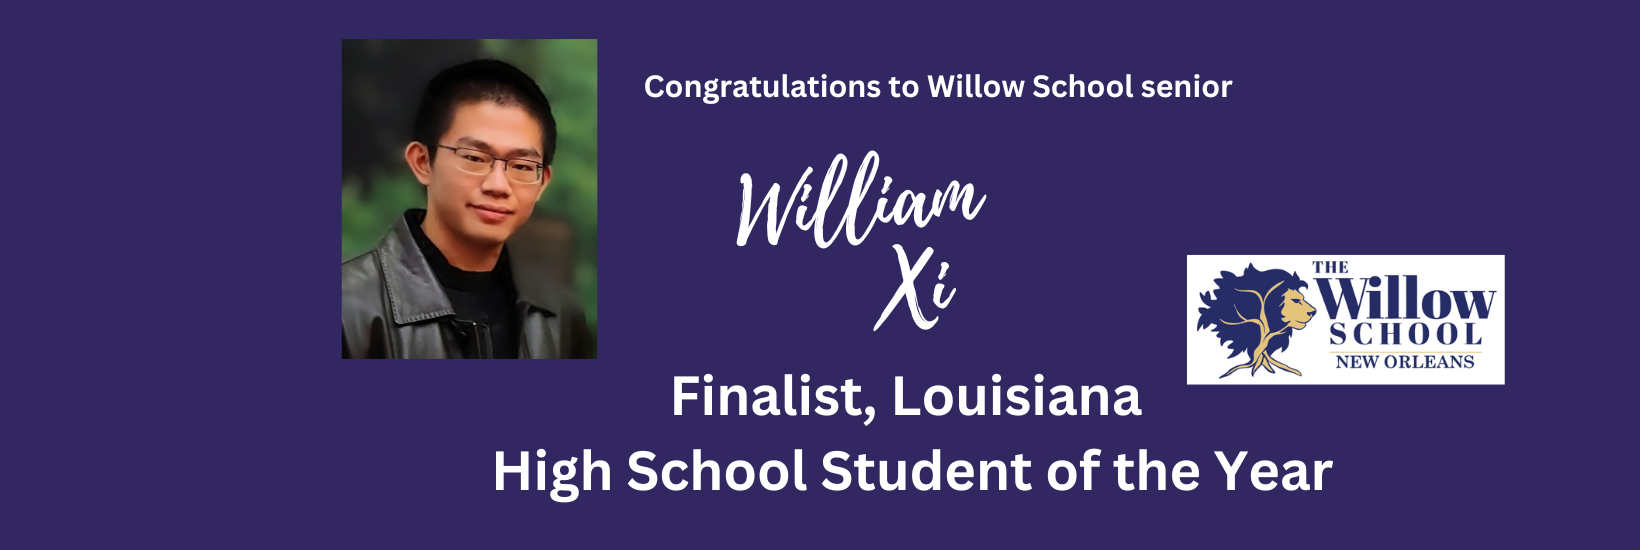 William Xi, Student of the Year Finalist